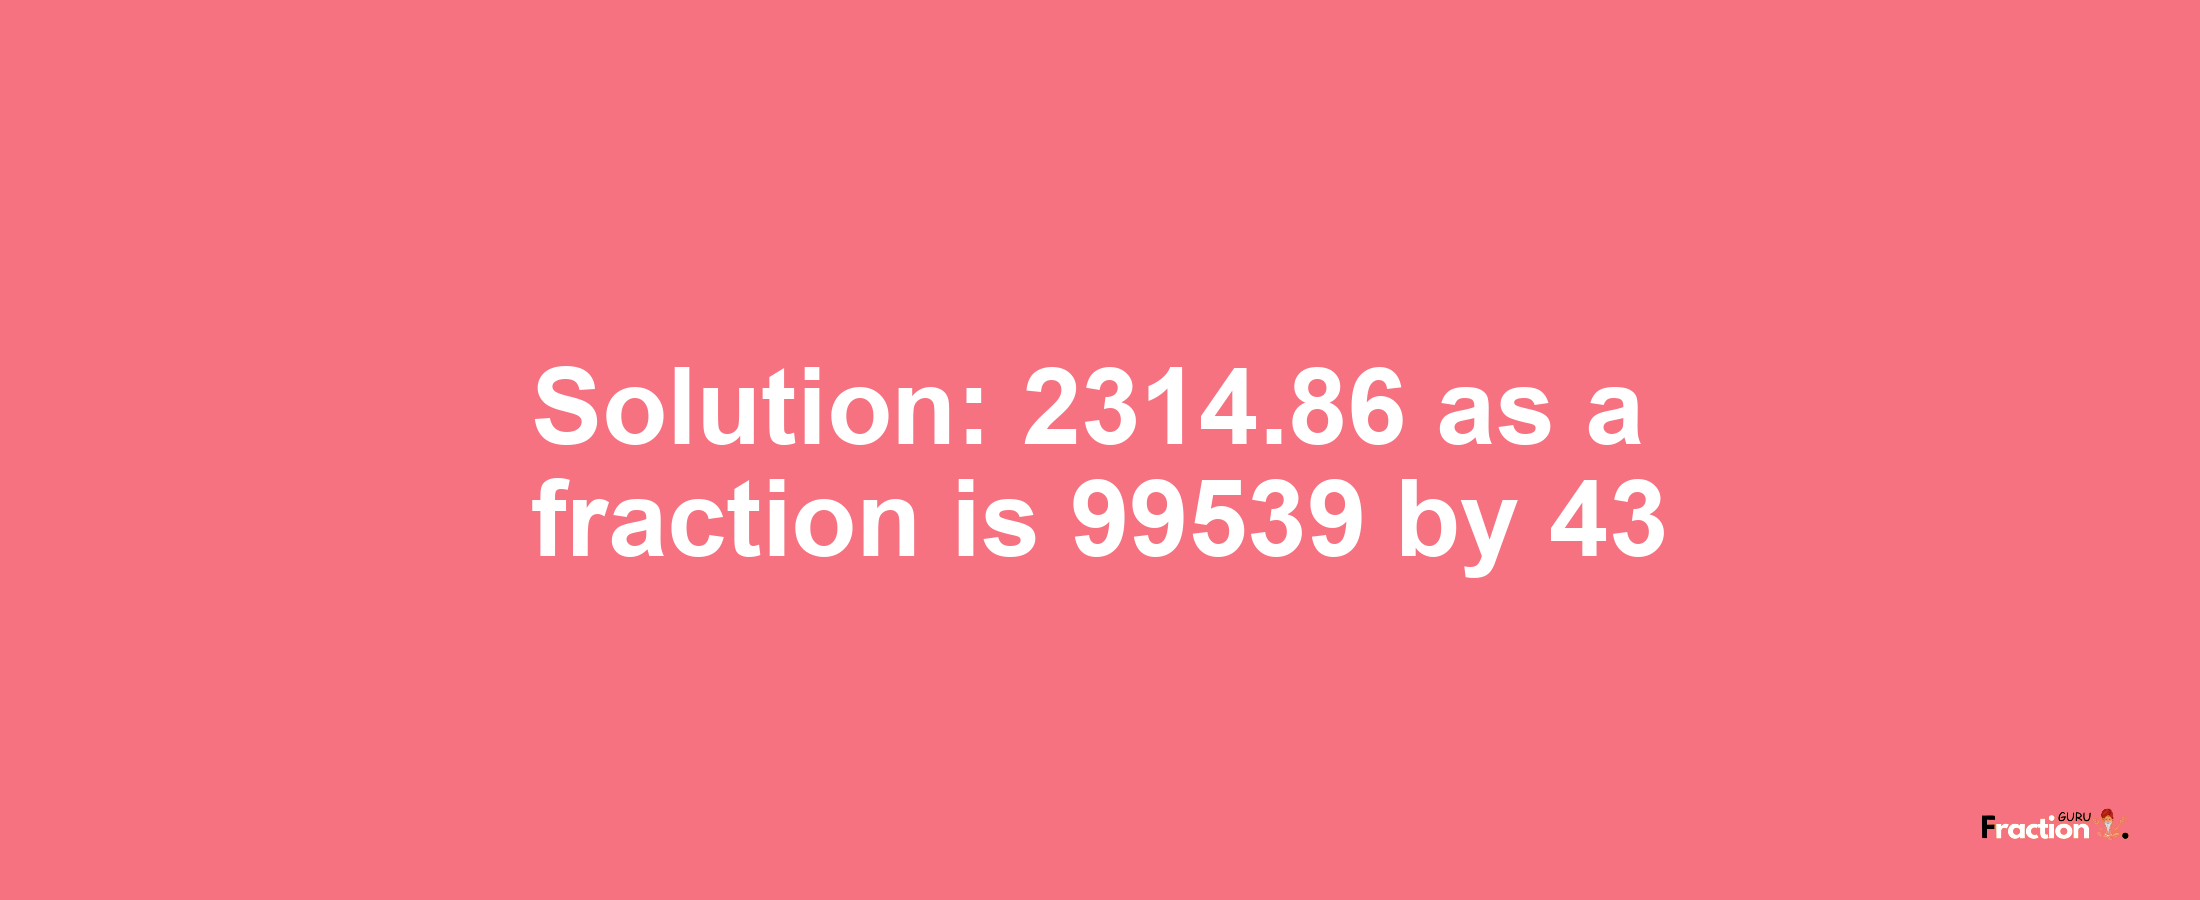 Solution:2314.86 as a fraction is 99539/43